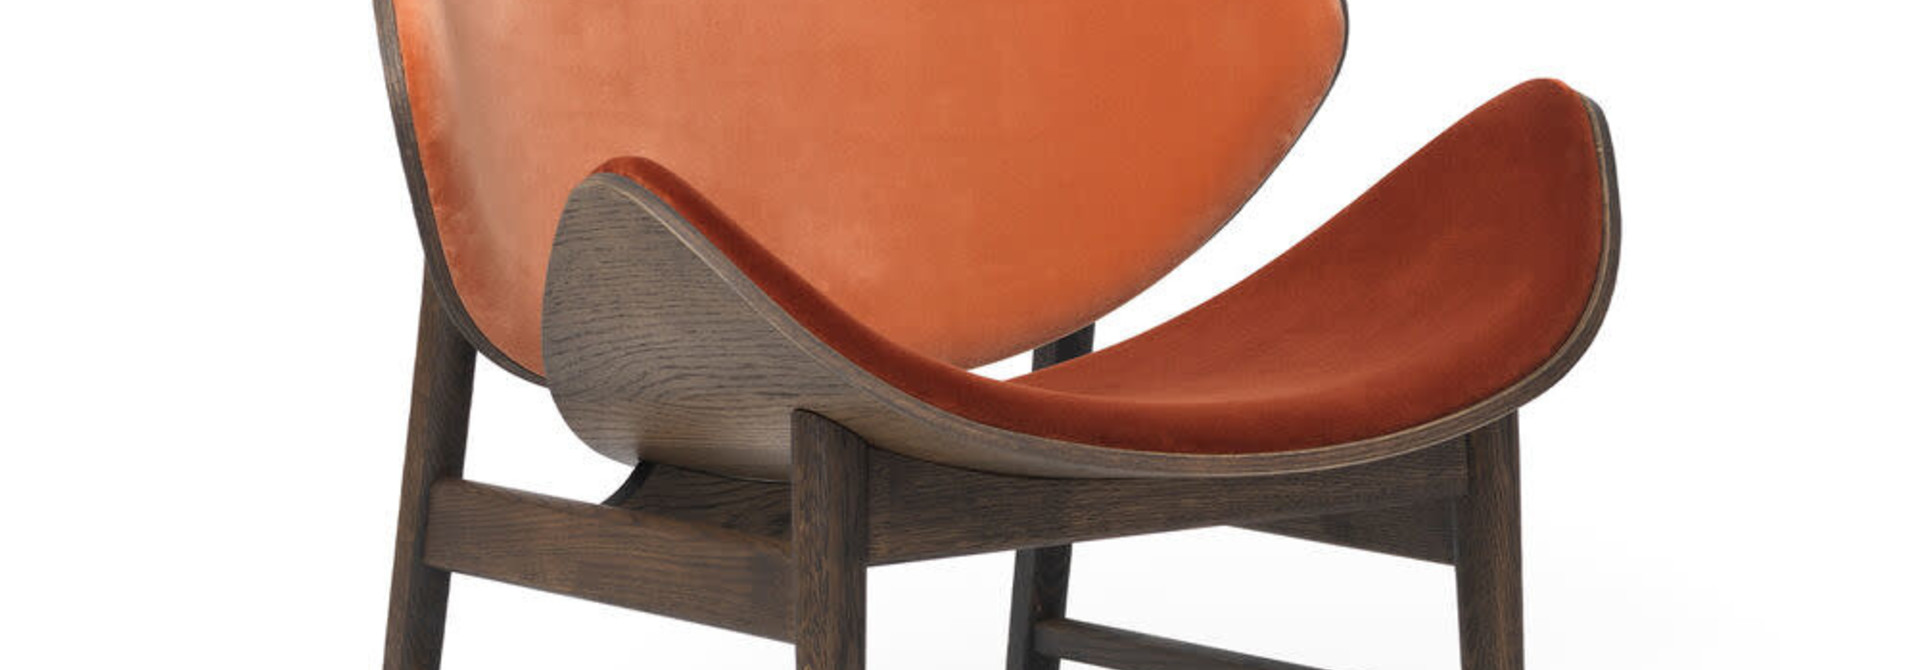 The Orange Lounge chair - Seat and back upholstery